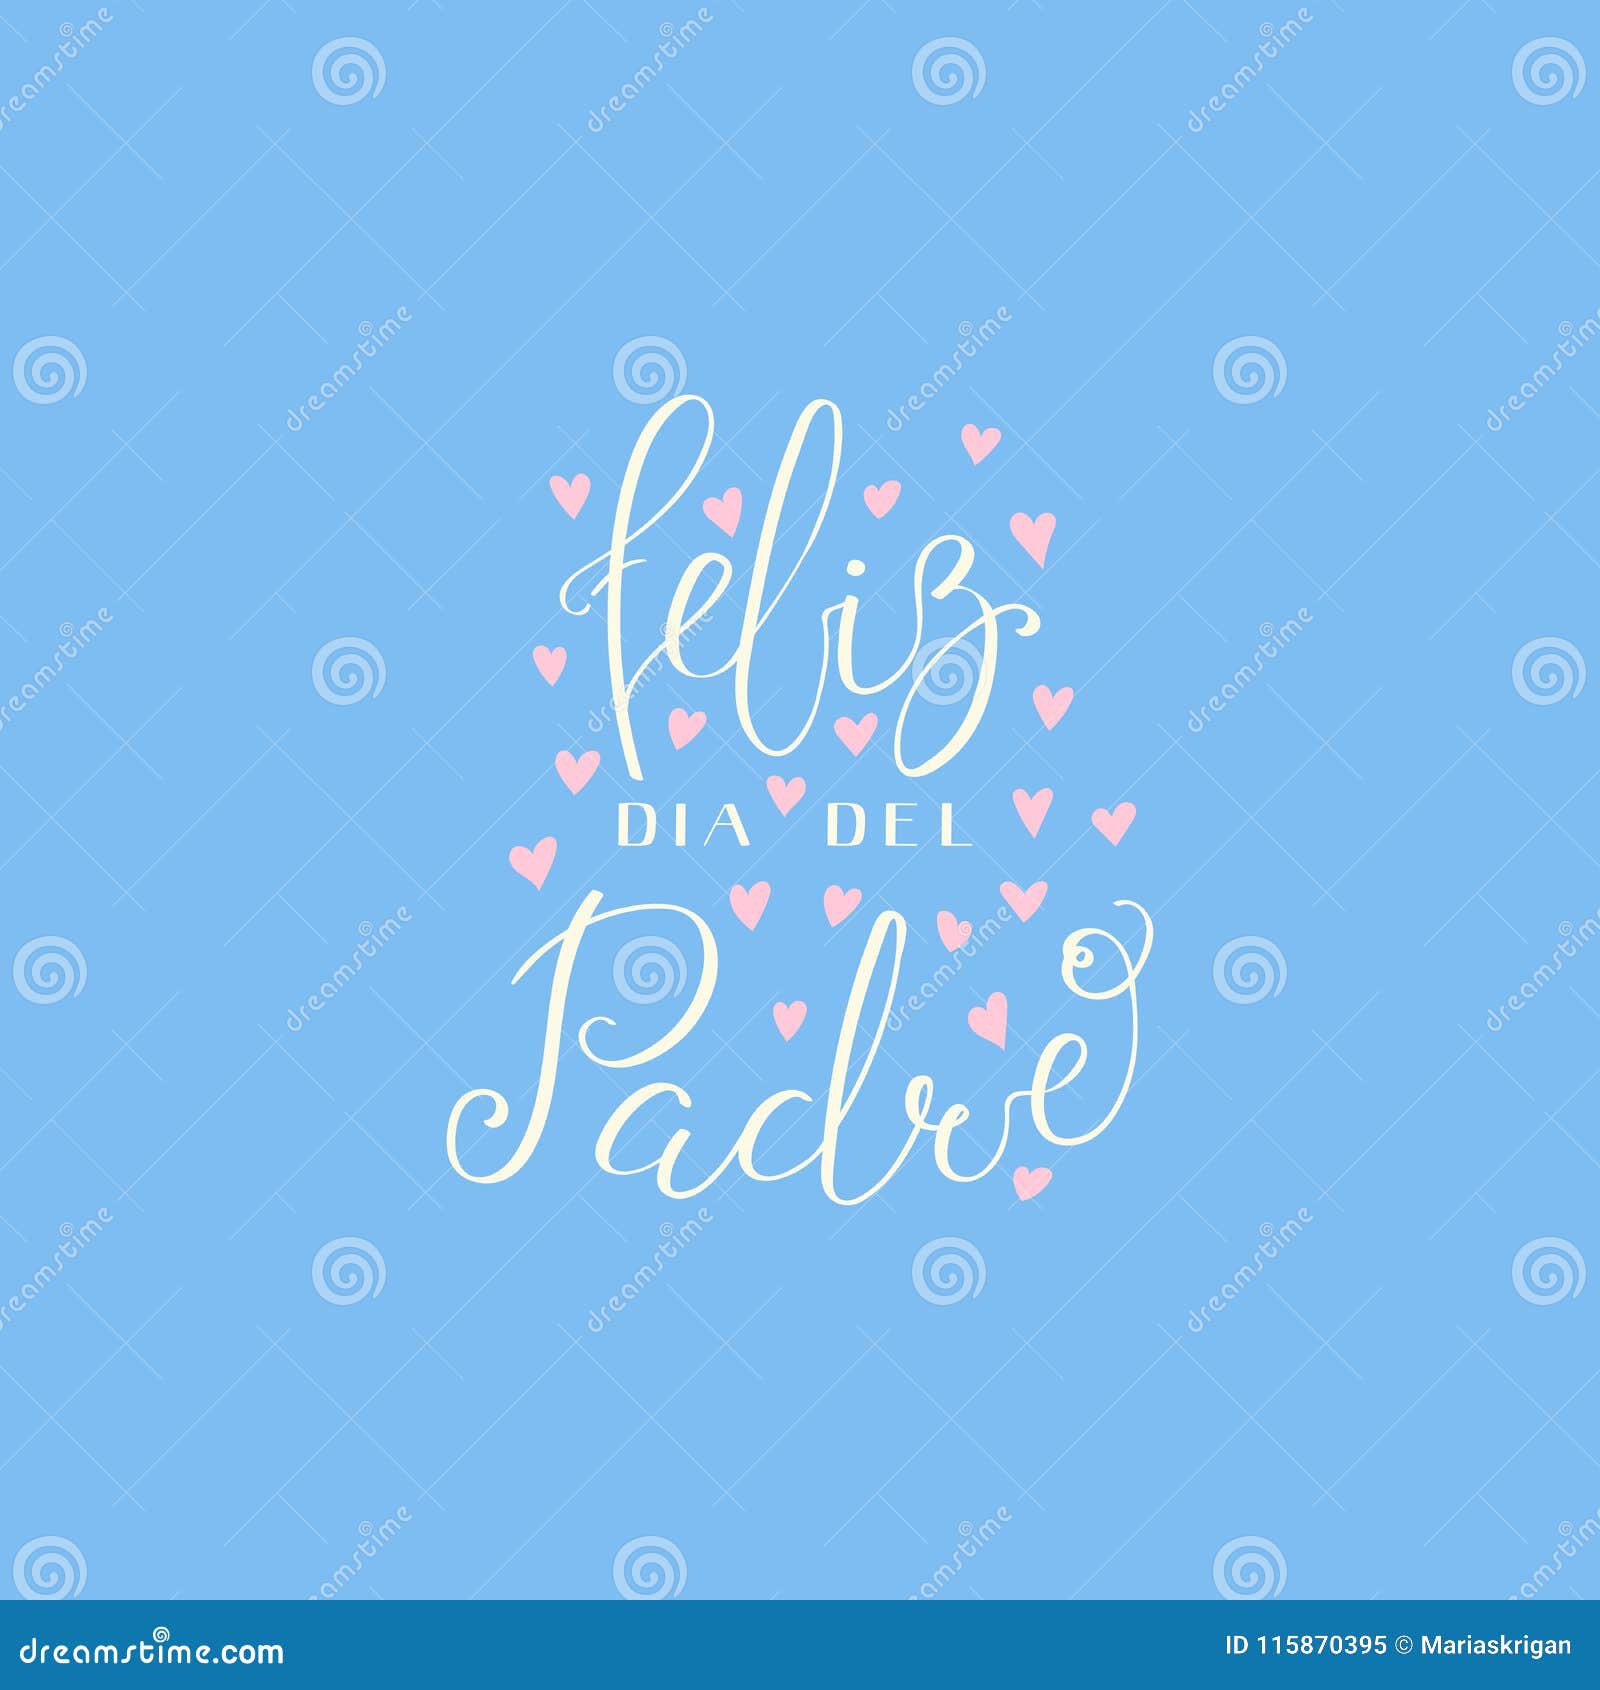 Fathers Day Lettering Quote in Spanish Stock Vector - Illustration ...